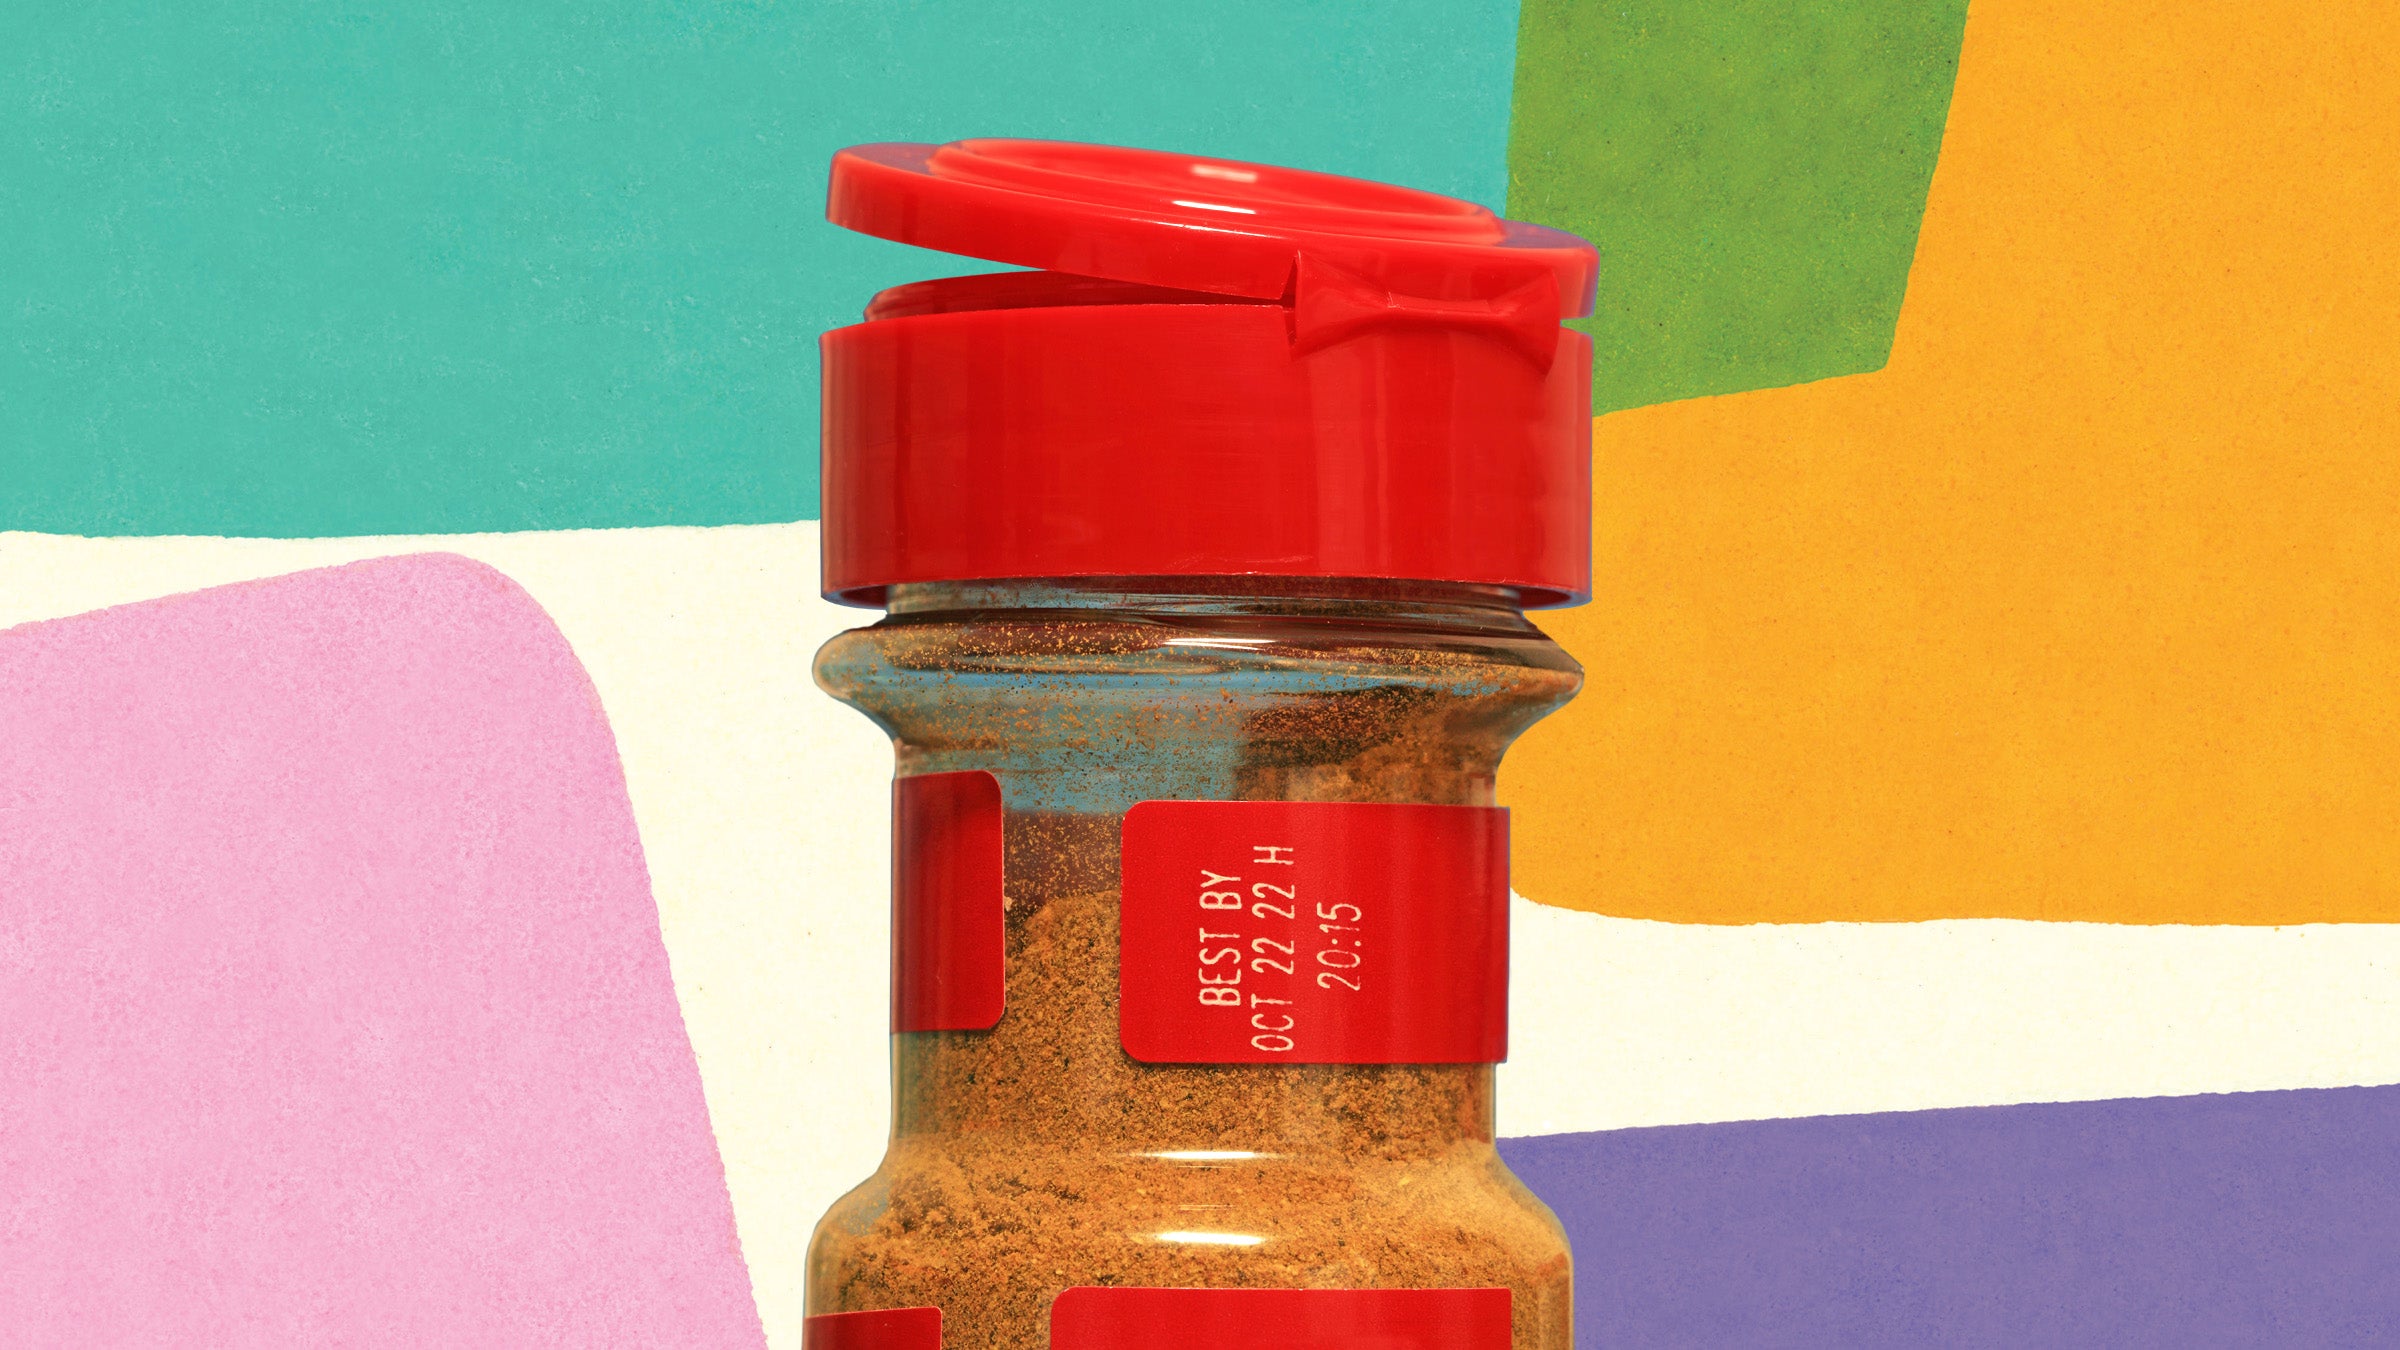 Do Spices Expire? A Guide to 30 Common Dried Herbs and Spices